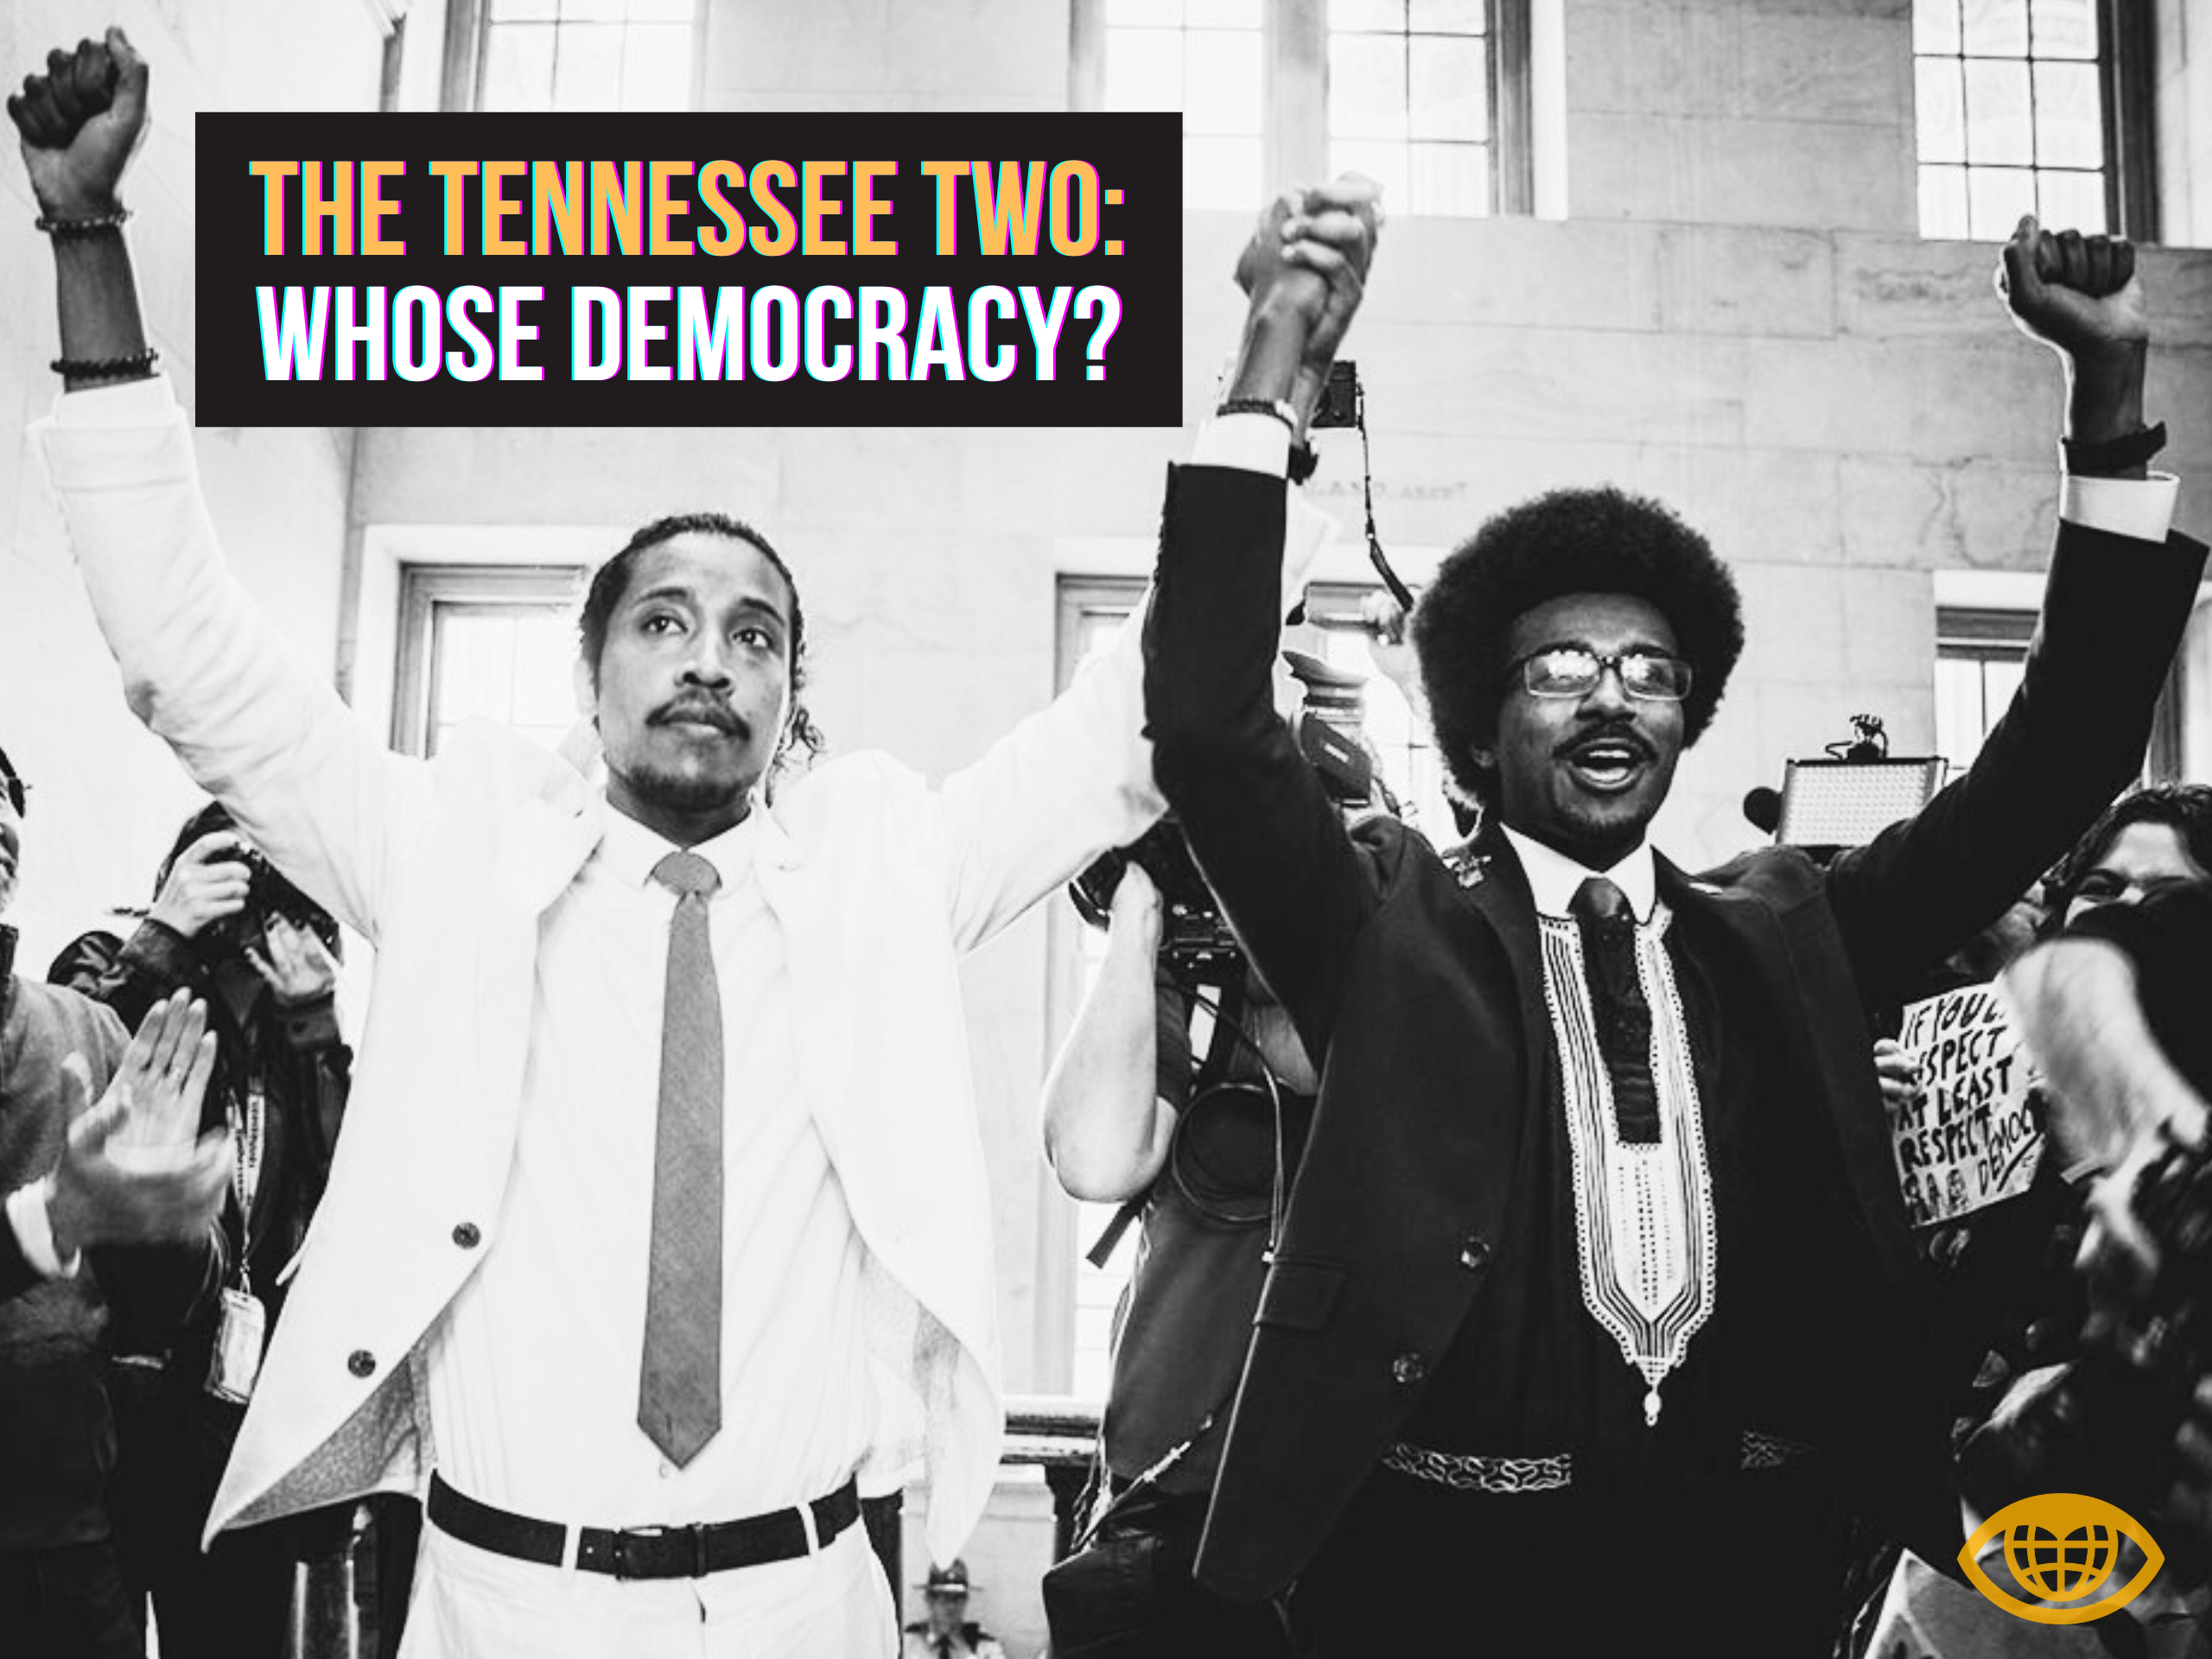 TENNESSEE TWO: WHOSE DEMOCRACY?